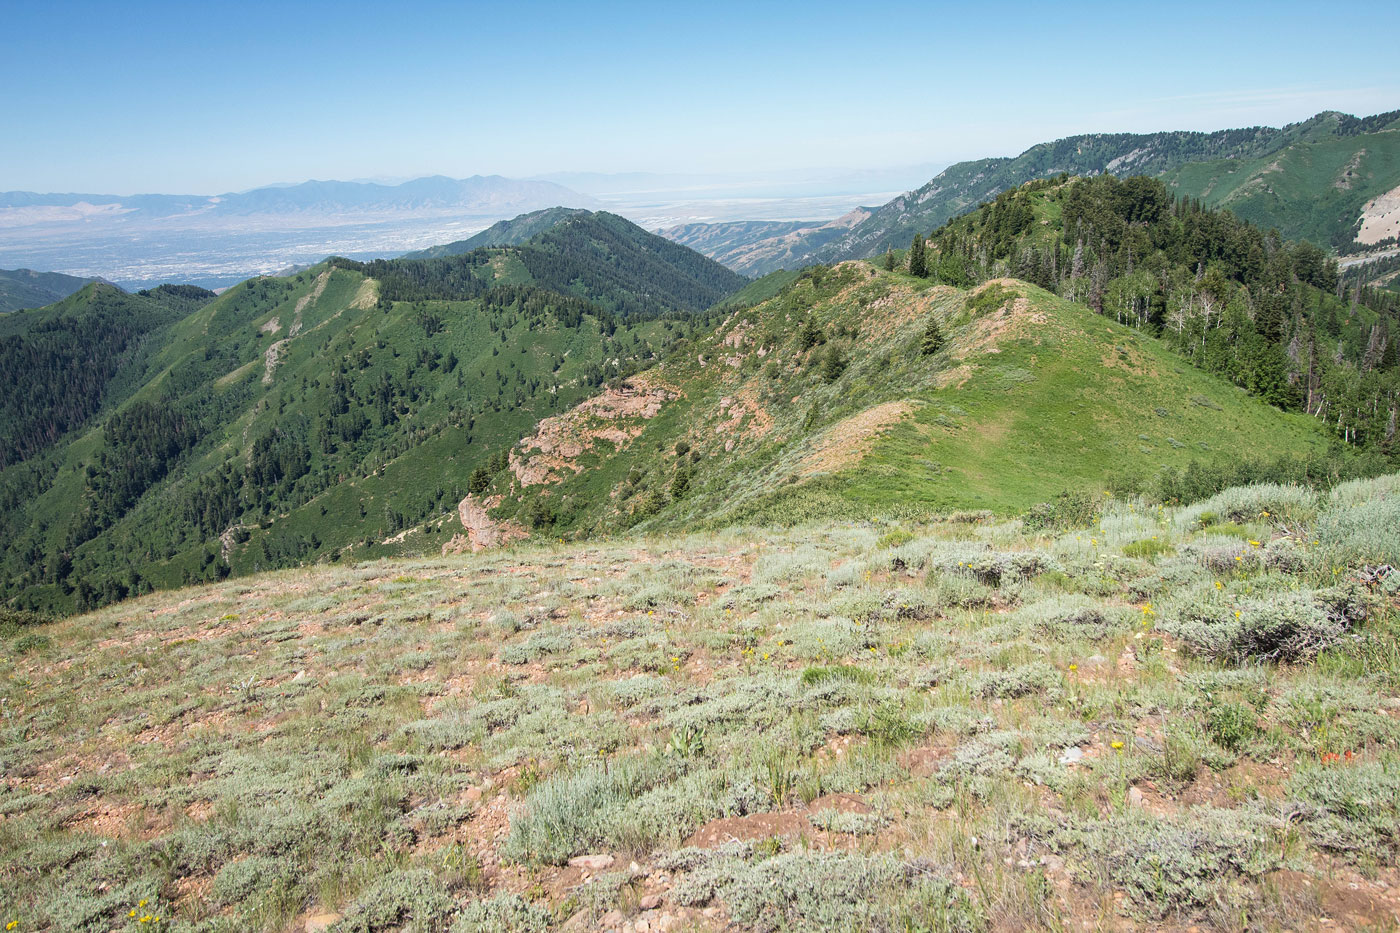 Hike Lookout Peak via Killyon Canyon and Black Mountain Loop in Wasatch-Cache National Forest, Utah - Stav is Lost